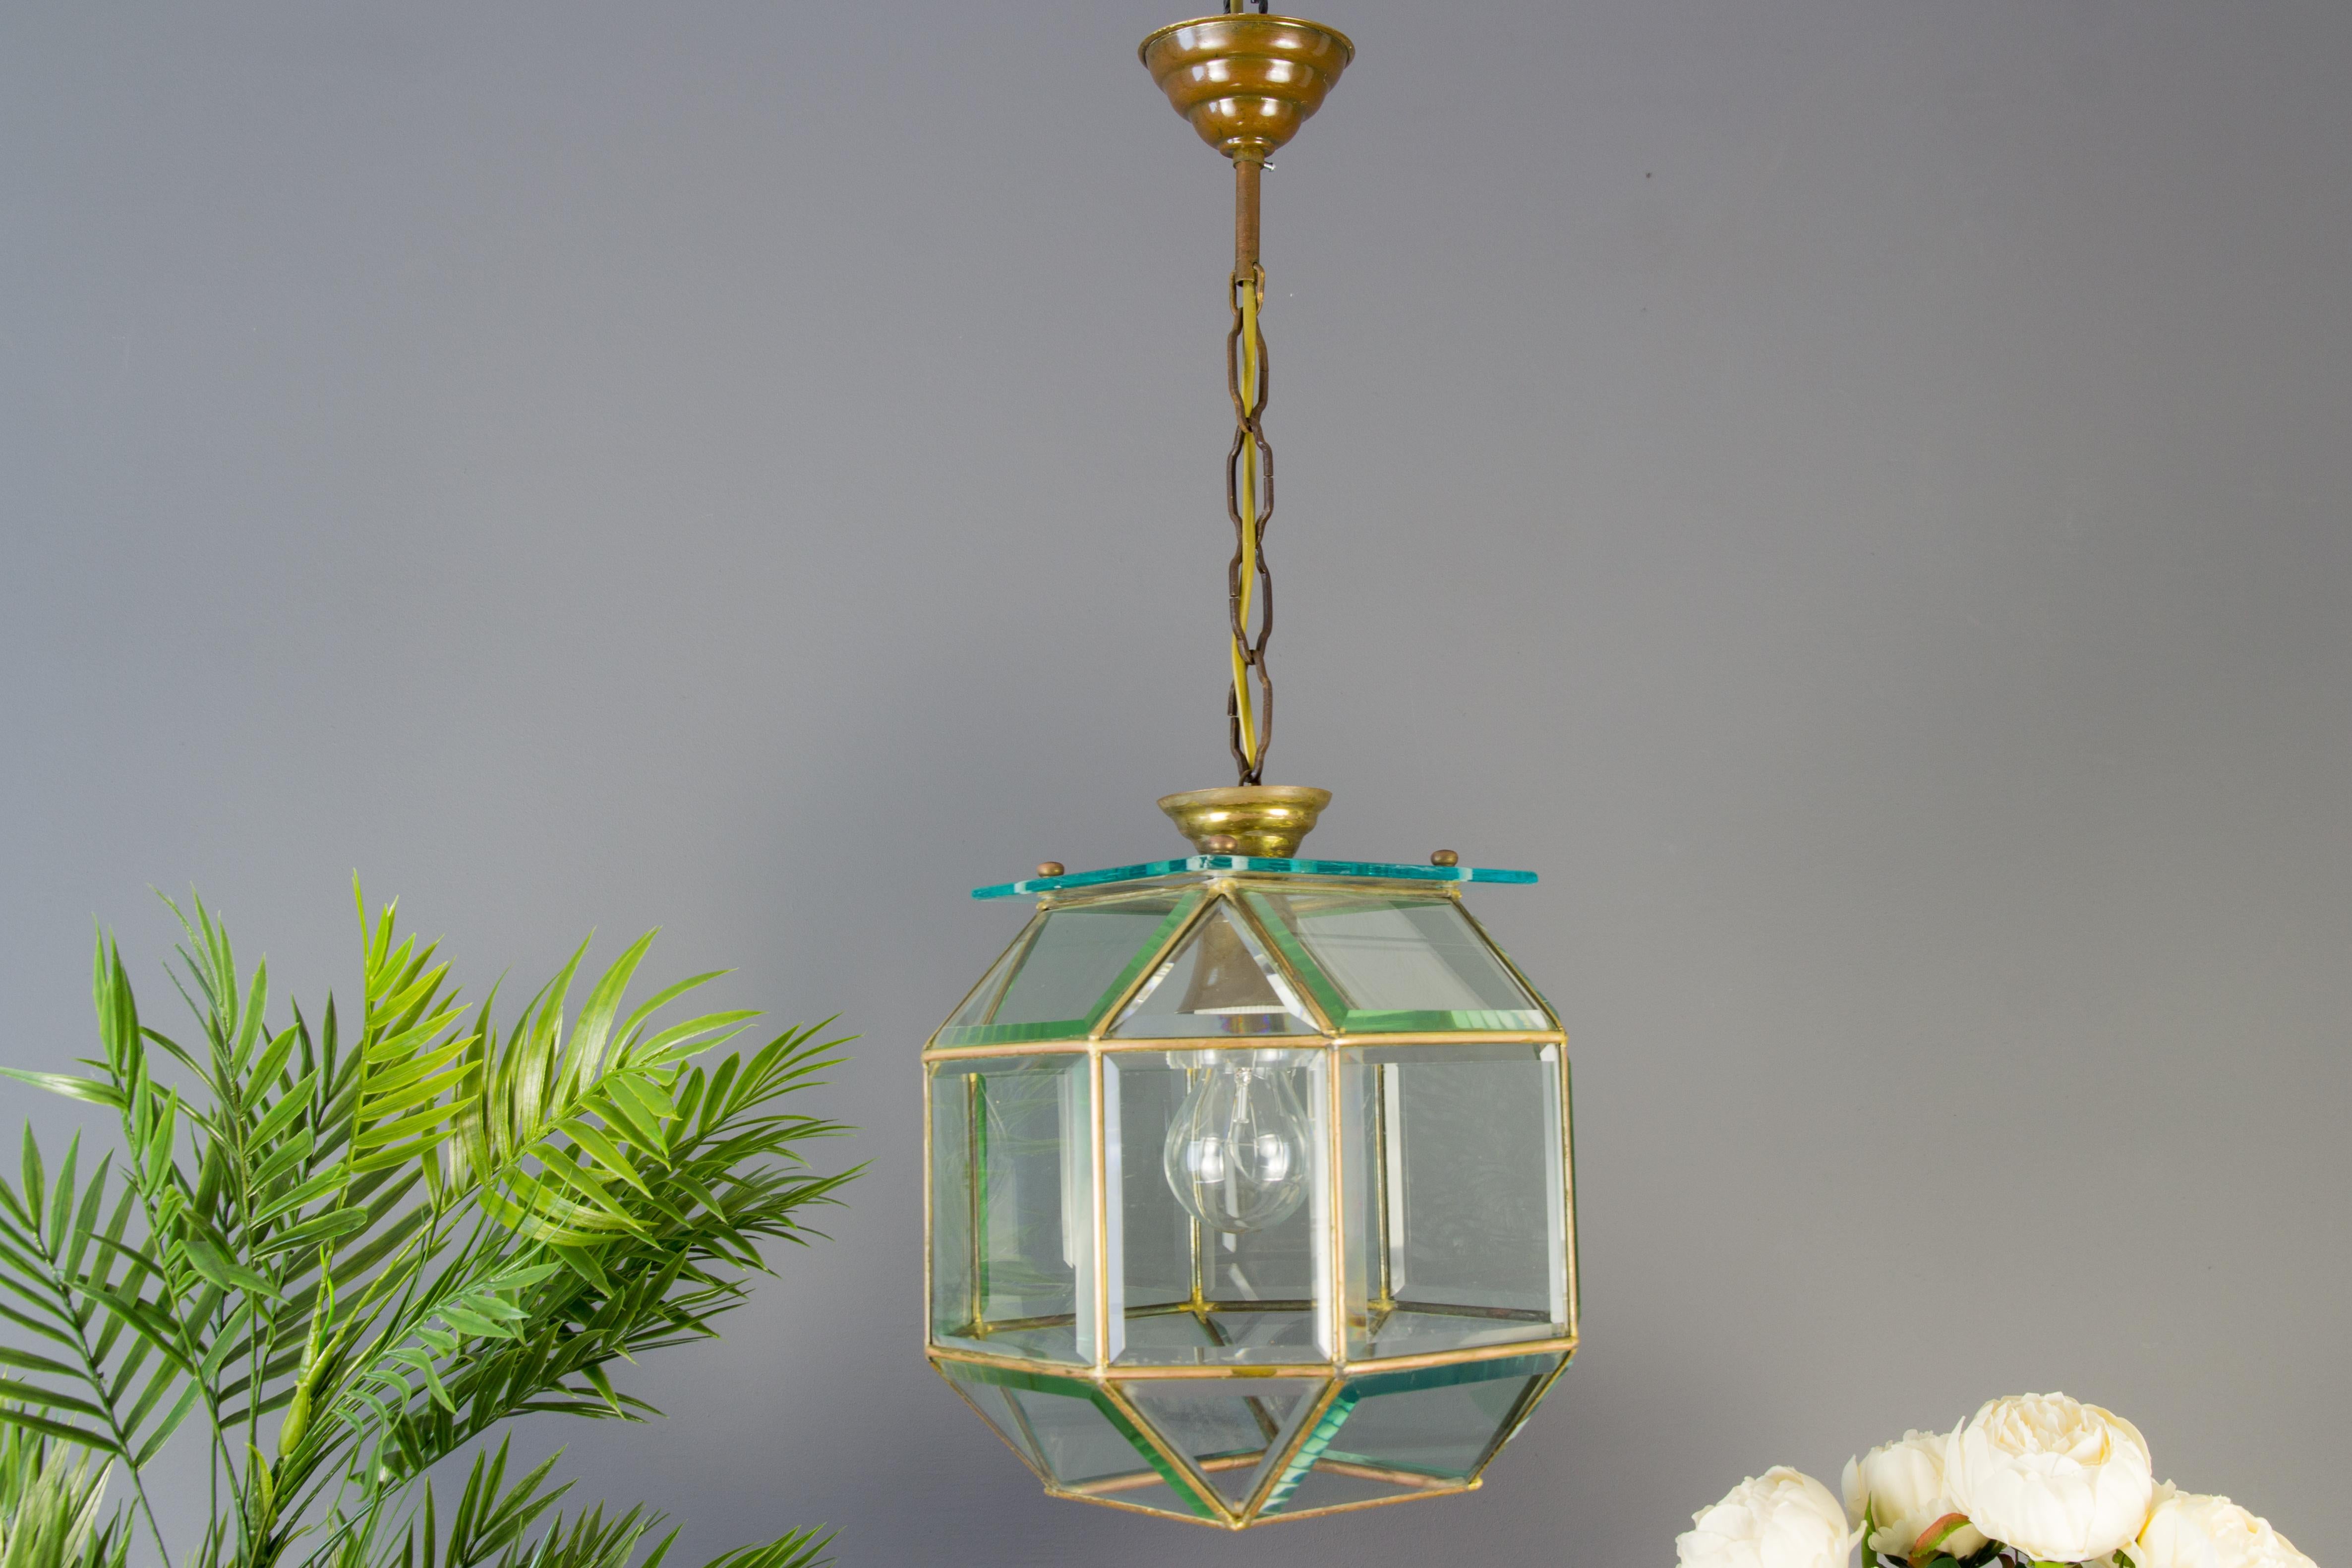 Italian single light beveled glass and brass pendant from circa the 1950s, attributed to Fontana Arte.
Very interesting geometric shape. One original socket for the E27 (E26) size light bulb.
Dimensions: Diameter 25 cm / 9.84 in, height 60 cm /